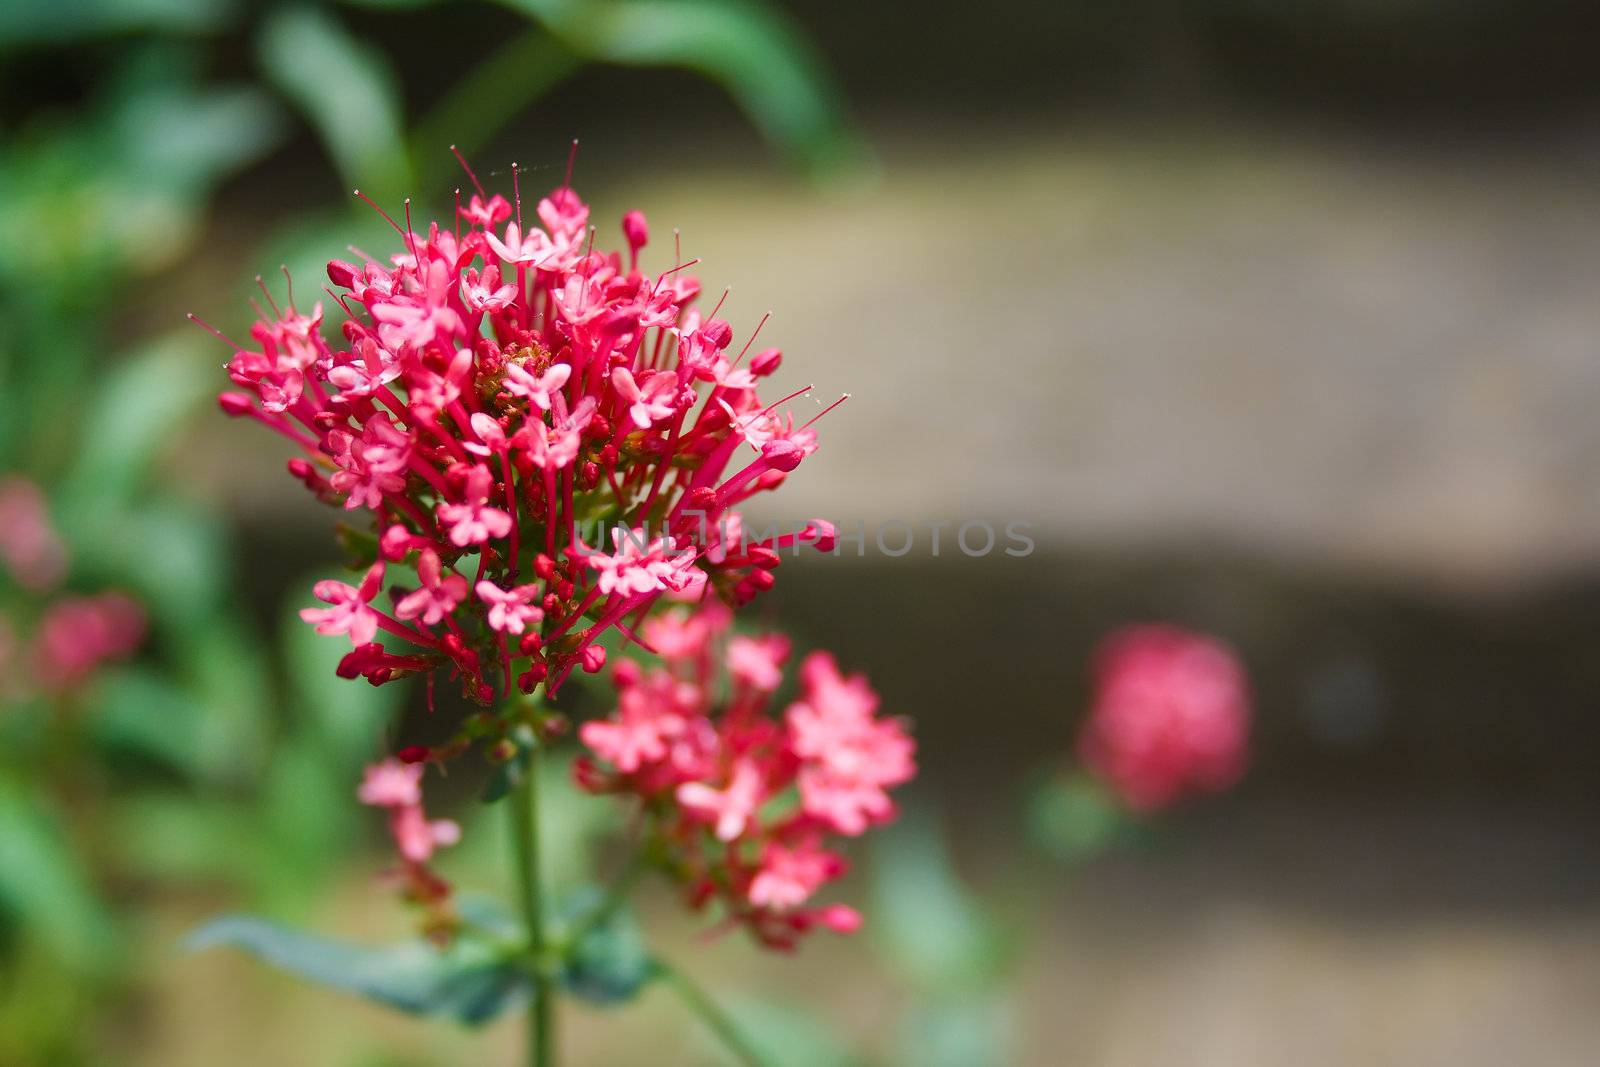 Red flower with out of focus background in Barcelona